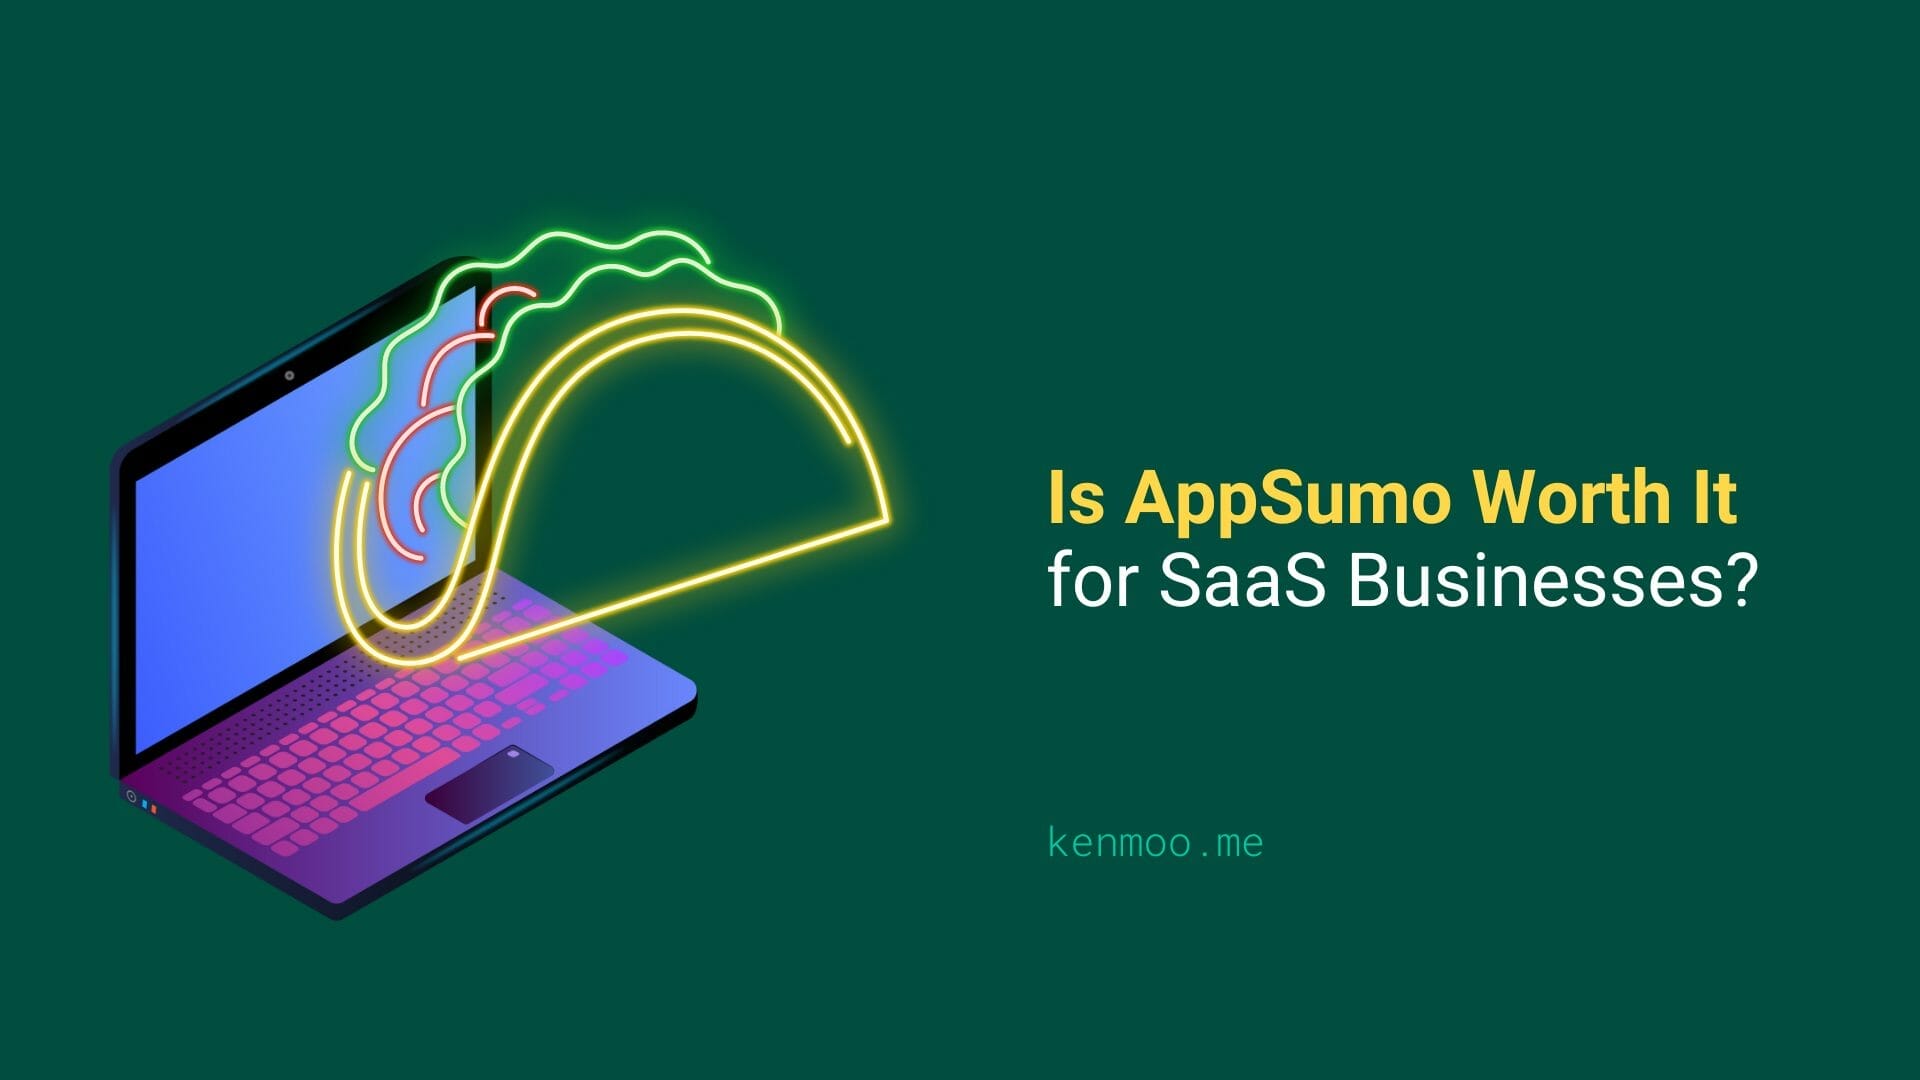 Is AppSumo Worth It for SaaS Businesses?